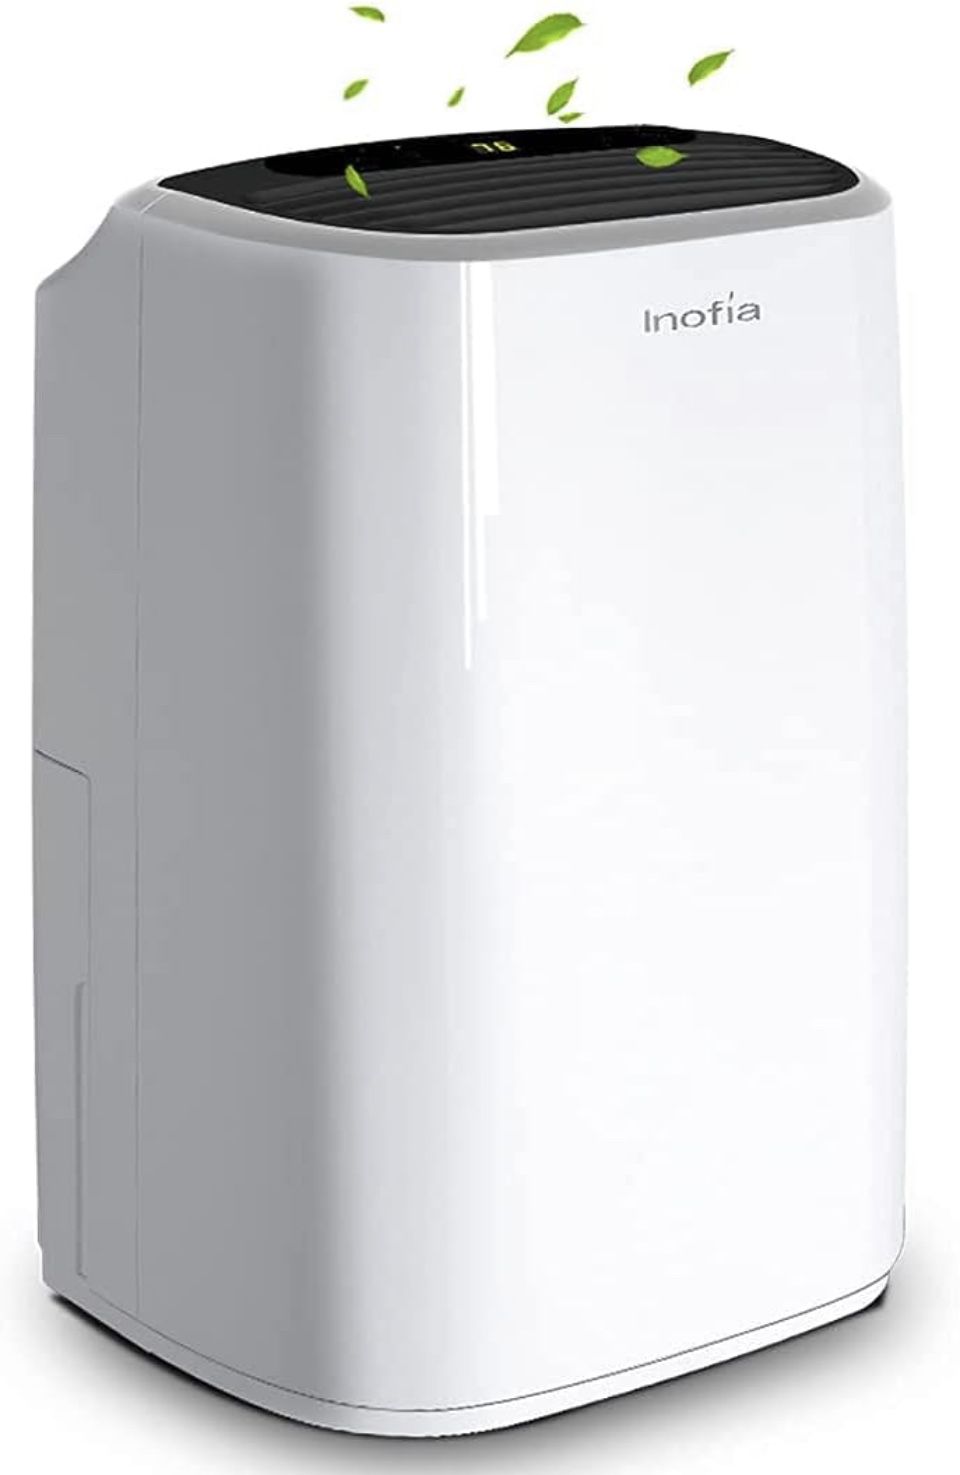 Inofia 30 Pint 1500 SQ FT Dehumidifiers for Home Basements Room, Portable Dehumidifiers for Small Rooms with Continuous Drain Hose & Water Reservoir